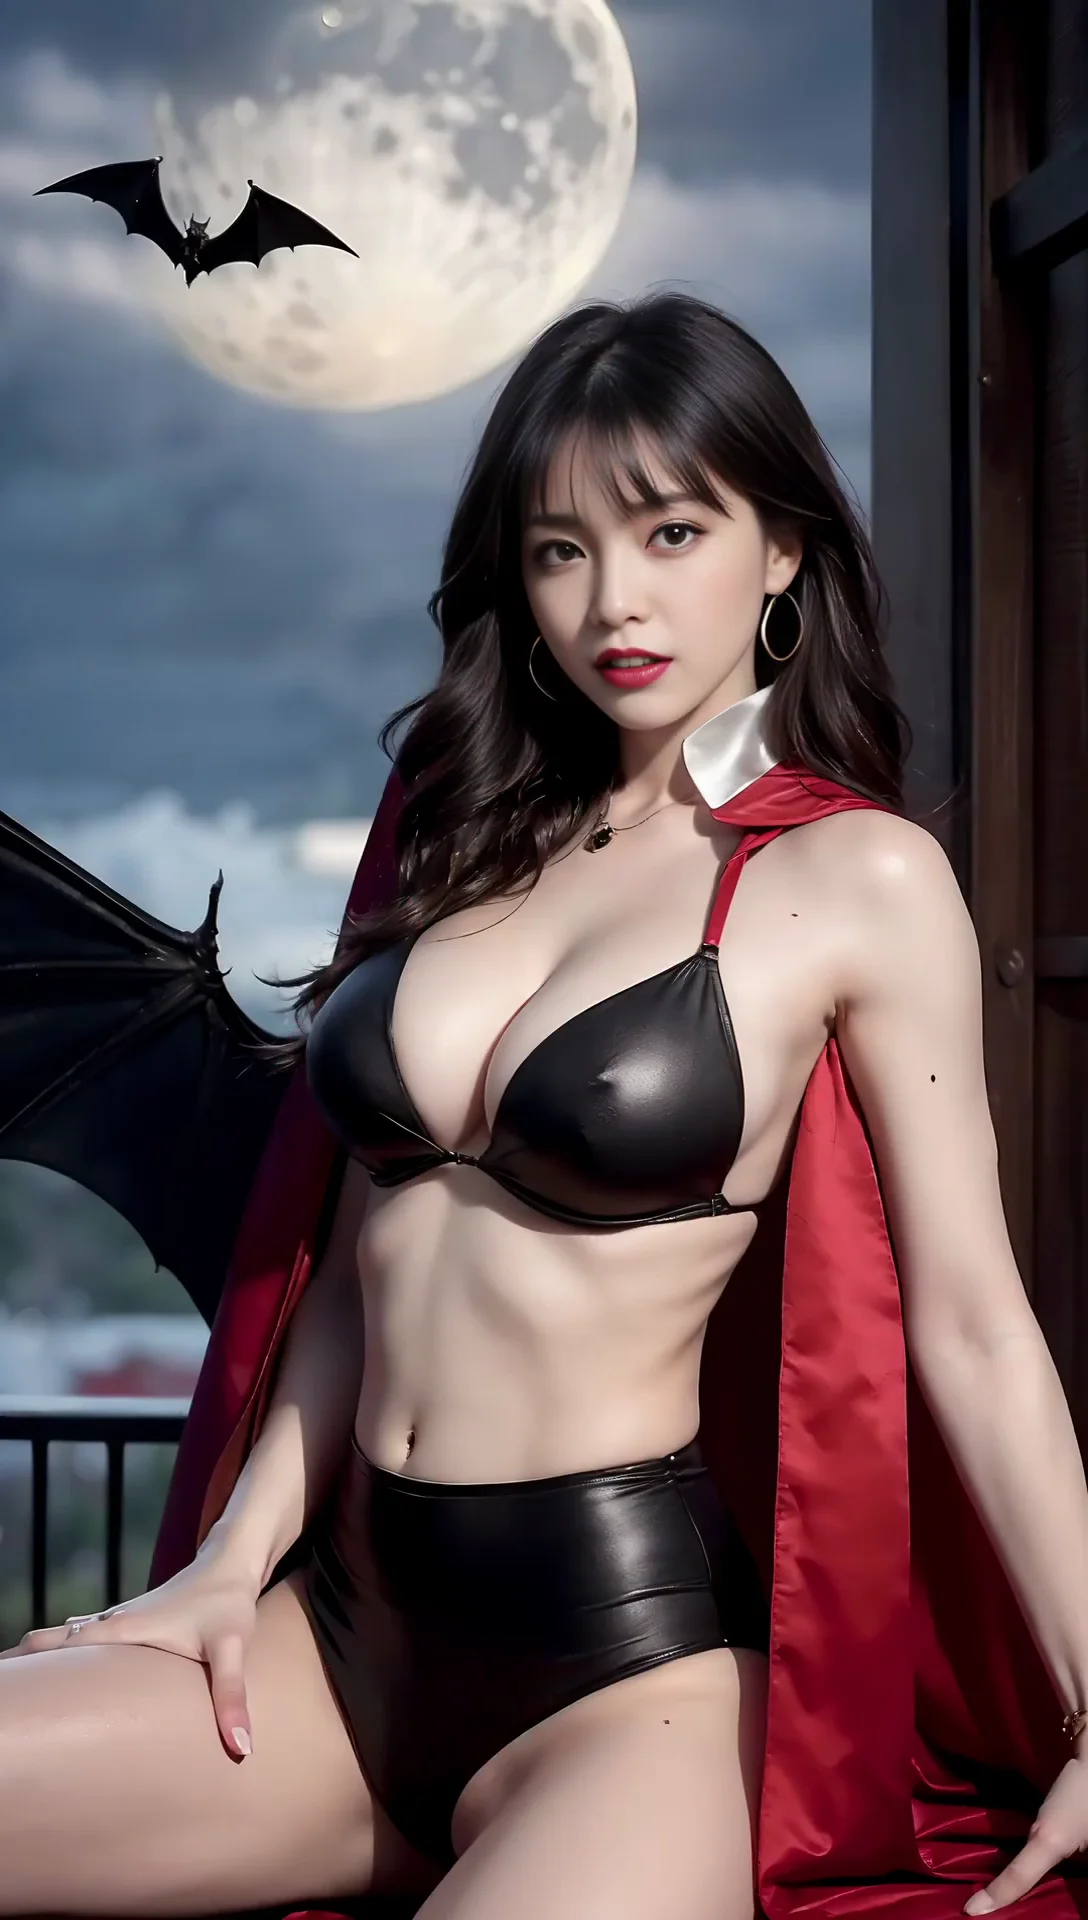 Ai Art LookBook: Sexy Girls in Vampire Cosplay Images 18